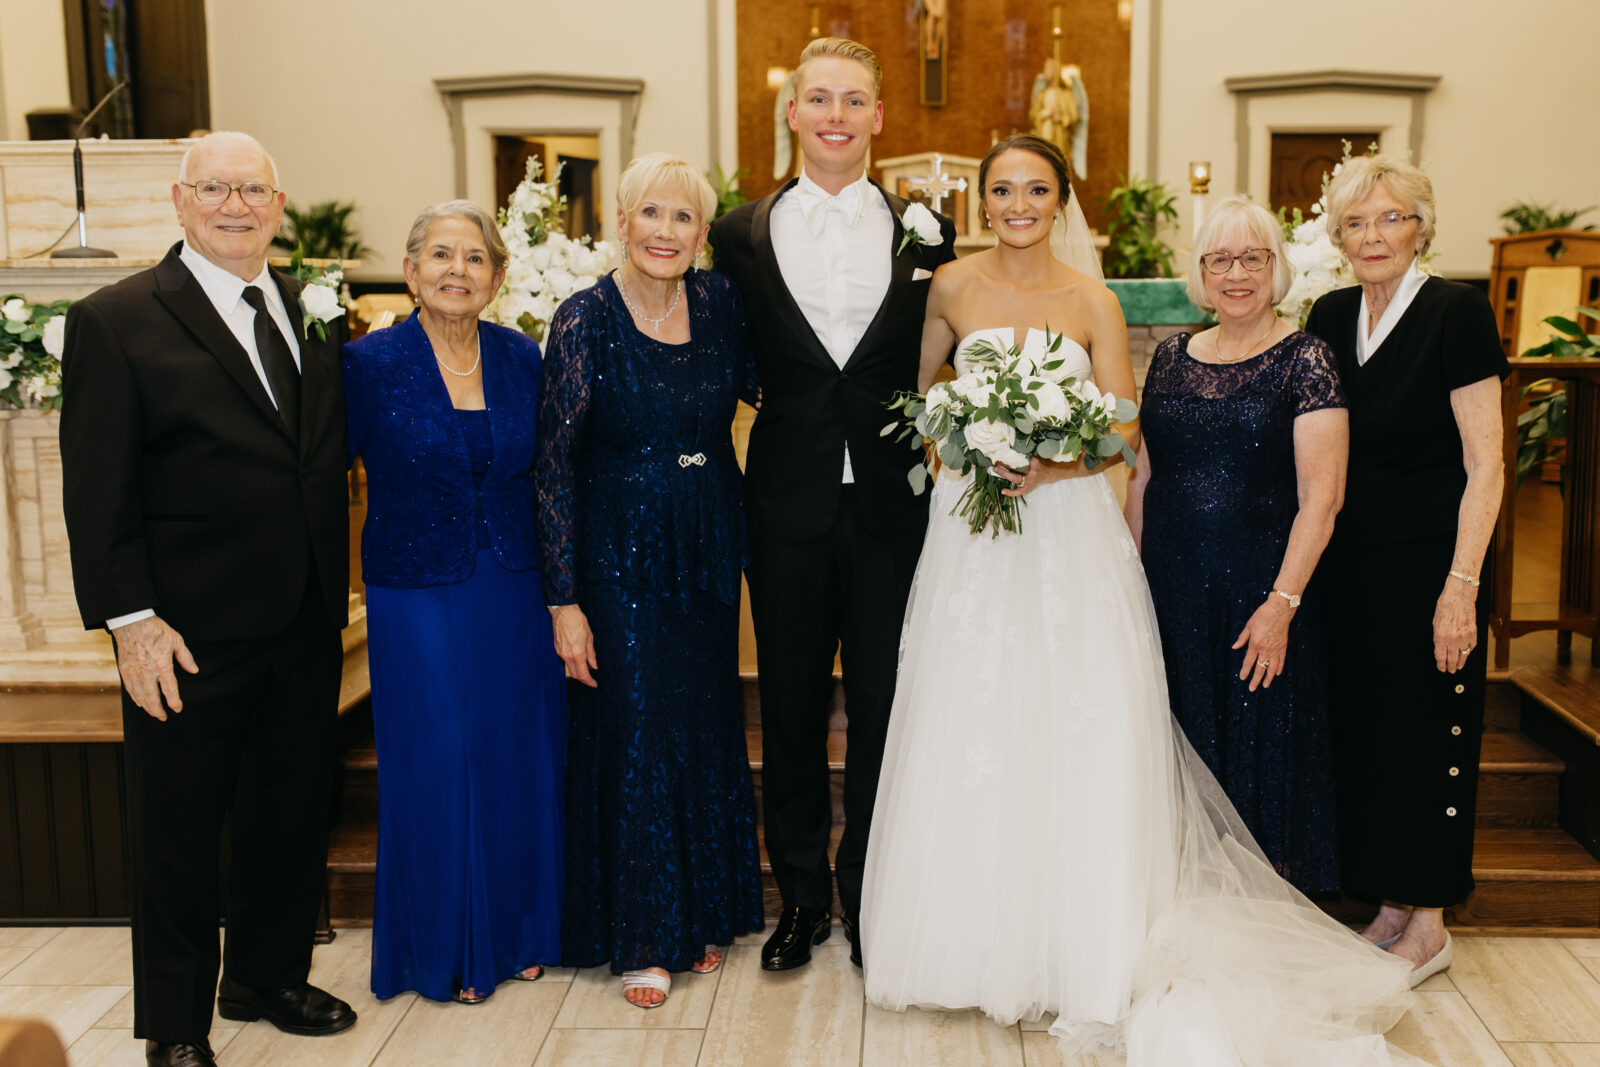 A photo of the lovely bride and groom's family